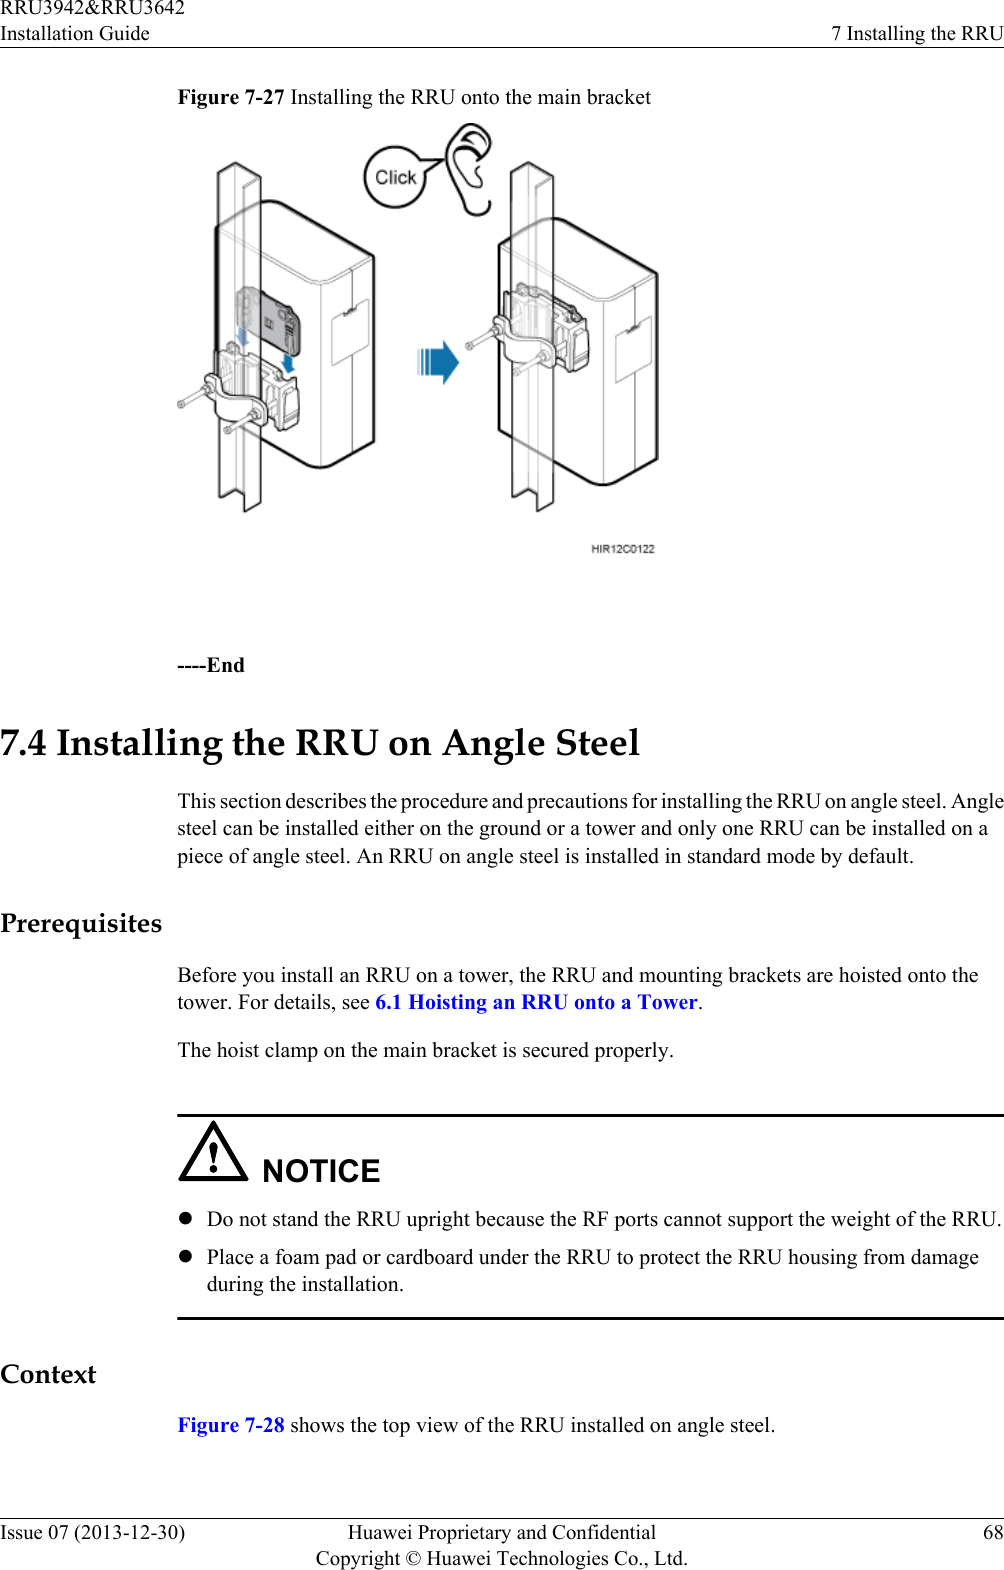 Figure 7-27 Installing the RRU onto the main bracket ----End7.4 Installing the RRU on Angle SteelThis section describes the procedure and precautions for installing the RRU on angle steel. Anglesteel can be installed either on the ground or a tower and only one RRU can be installed on apiece of angle steel. An RRU on angle steel is installed in standard mode by default.PrerequisitesBefore you install an RRU on a tower, the RRU and mounting brackets are hoisted onto thetower. For details, see 6.1 Hoisting an RRU onto a Tower.The hoist clamp on the main bracket is secured properly.NOTICElDo not stand the RRU upright because the RF ports cannot support the weight of the RRU.lPlace a foam pad or cardboard under the RRU to protect the RRU housing from damageduring the installation.ContextFigure 7-28 shows the top view of the RRU installed on angle steel.RRU3942&amp;RRU3642Installation Guide 7 Installing the RRUIssue 07 (2013-12-30) Huawei Proprietary and ConfidentialCopyright © Huawei Technologies Co., Ltd.68